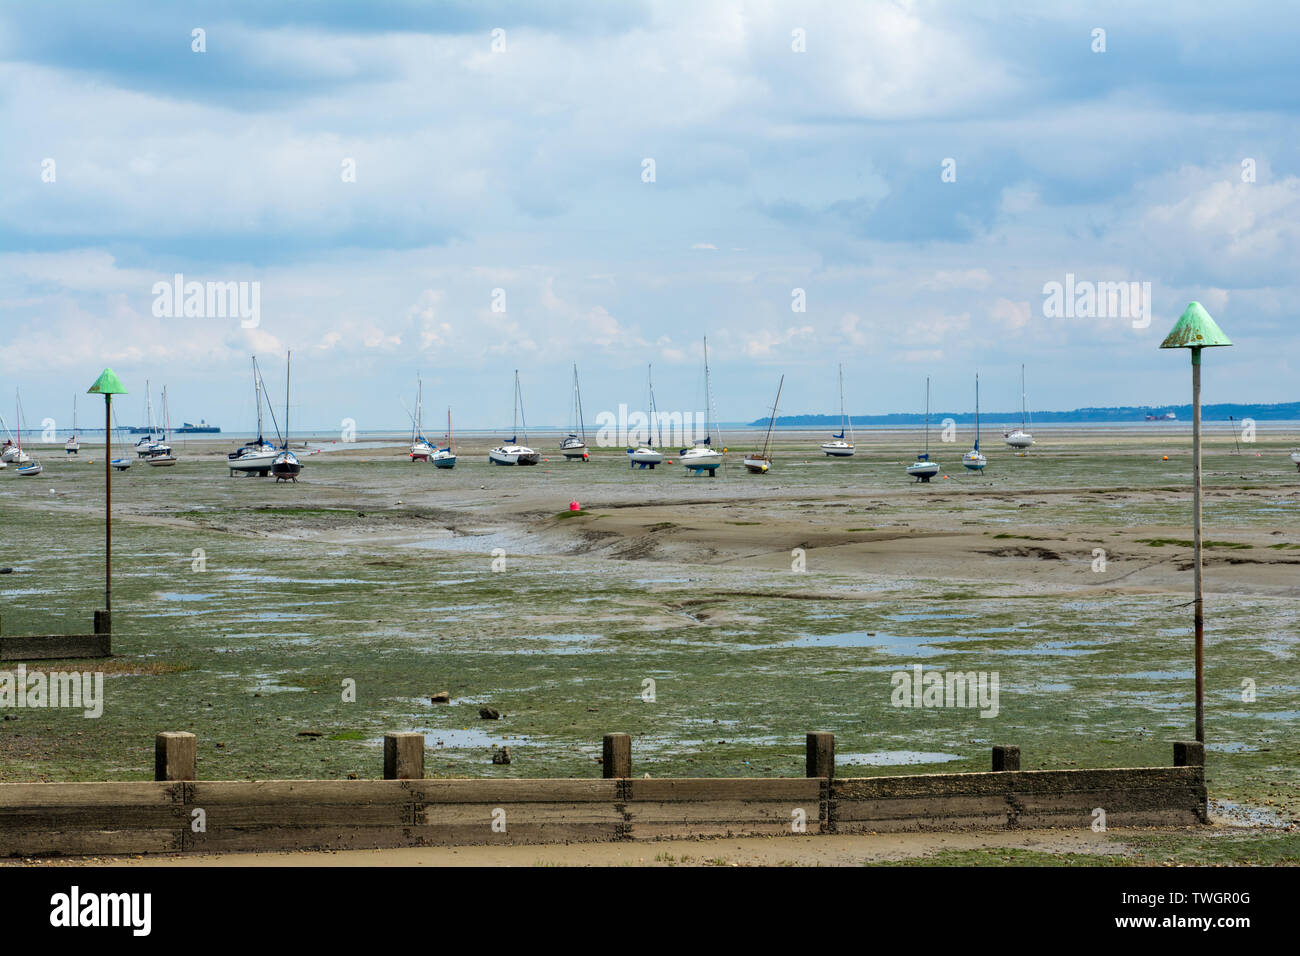 leigh, Essex, UK, 2019-05-28, Coastal fishing village with yachts and fishing boats securely moored whilst tide is out. Stock Photo